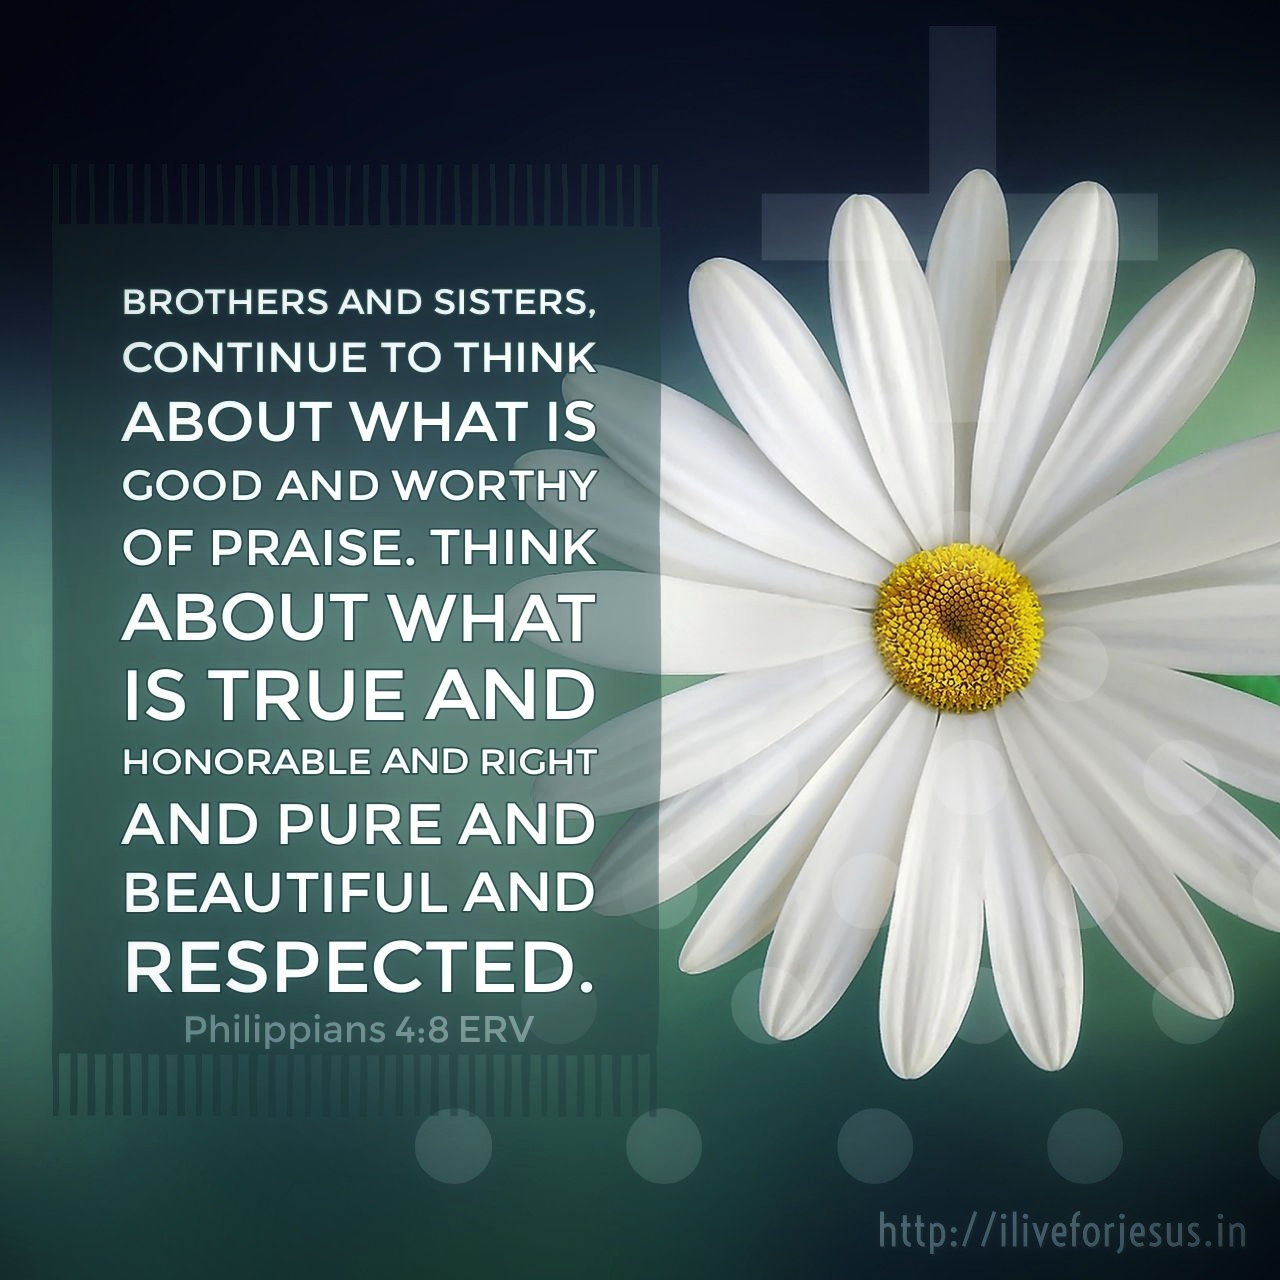 Brothers and sisters, continue to think about what is good and worthy of praise. Think about what is true and honorable and right and pure and beautiful and respected. Philippians 4:8 ERV